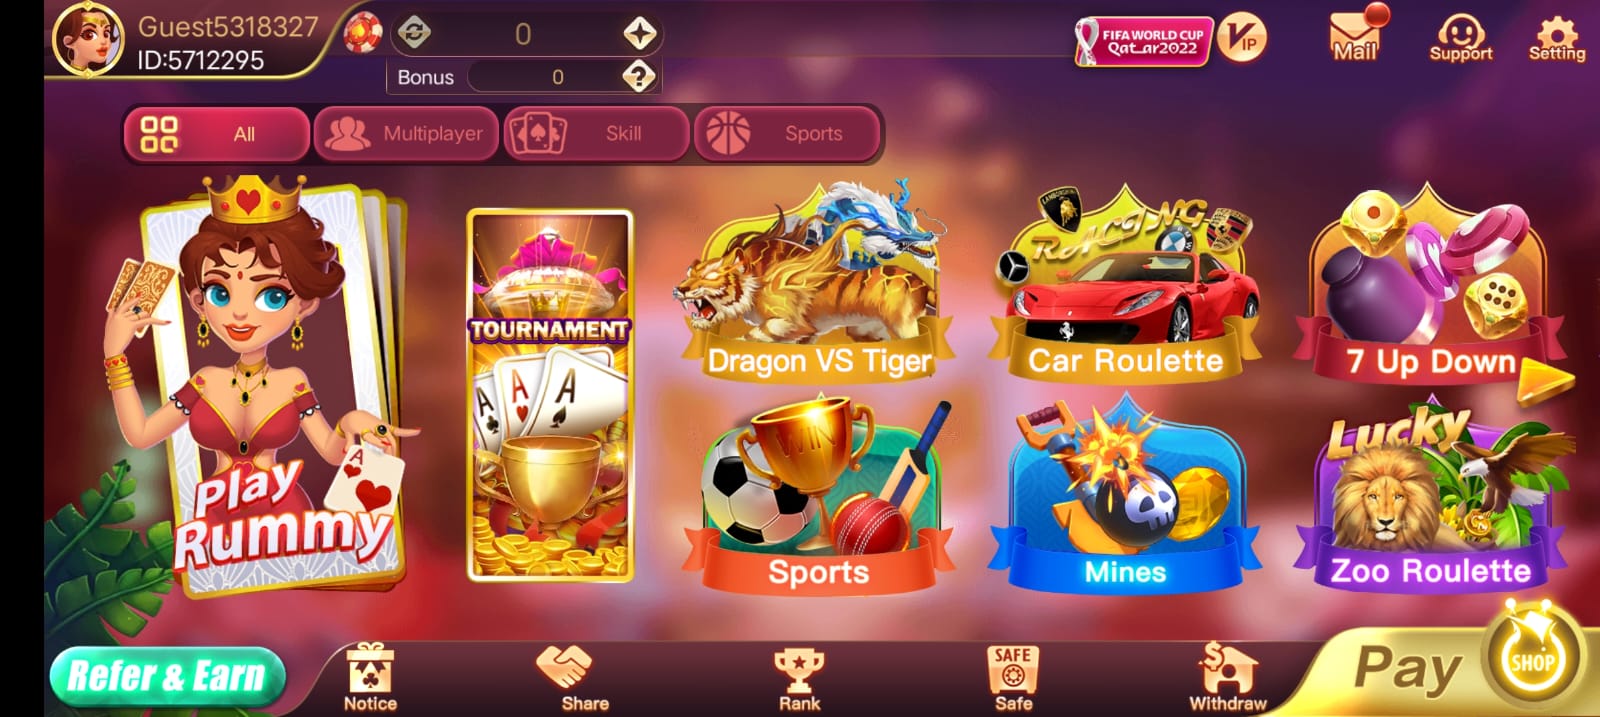 Available Games on Rummy Loot App